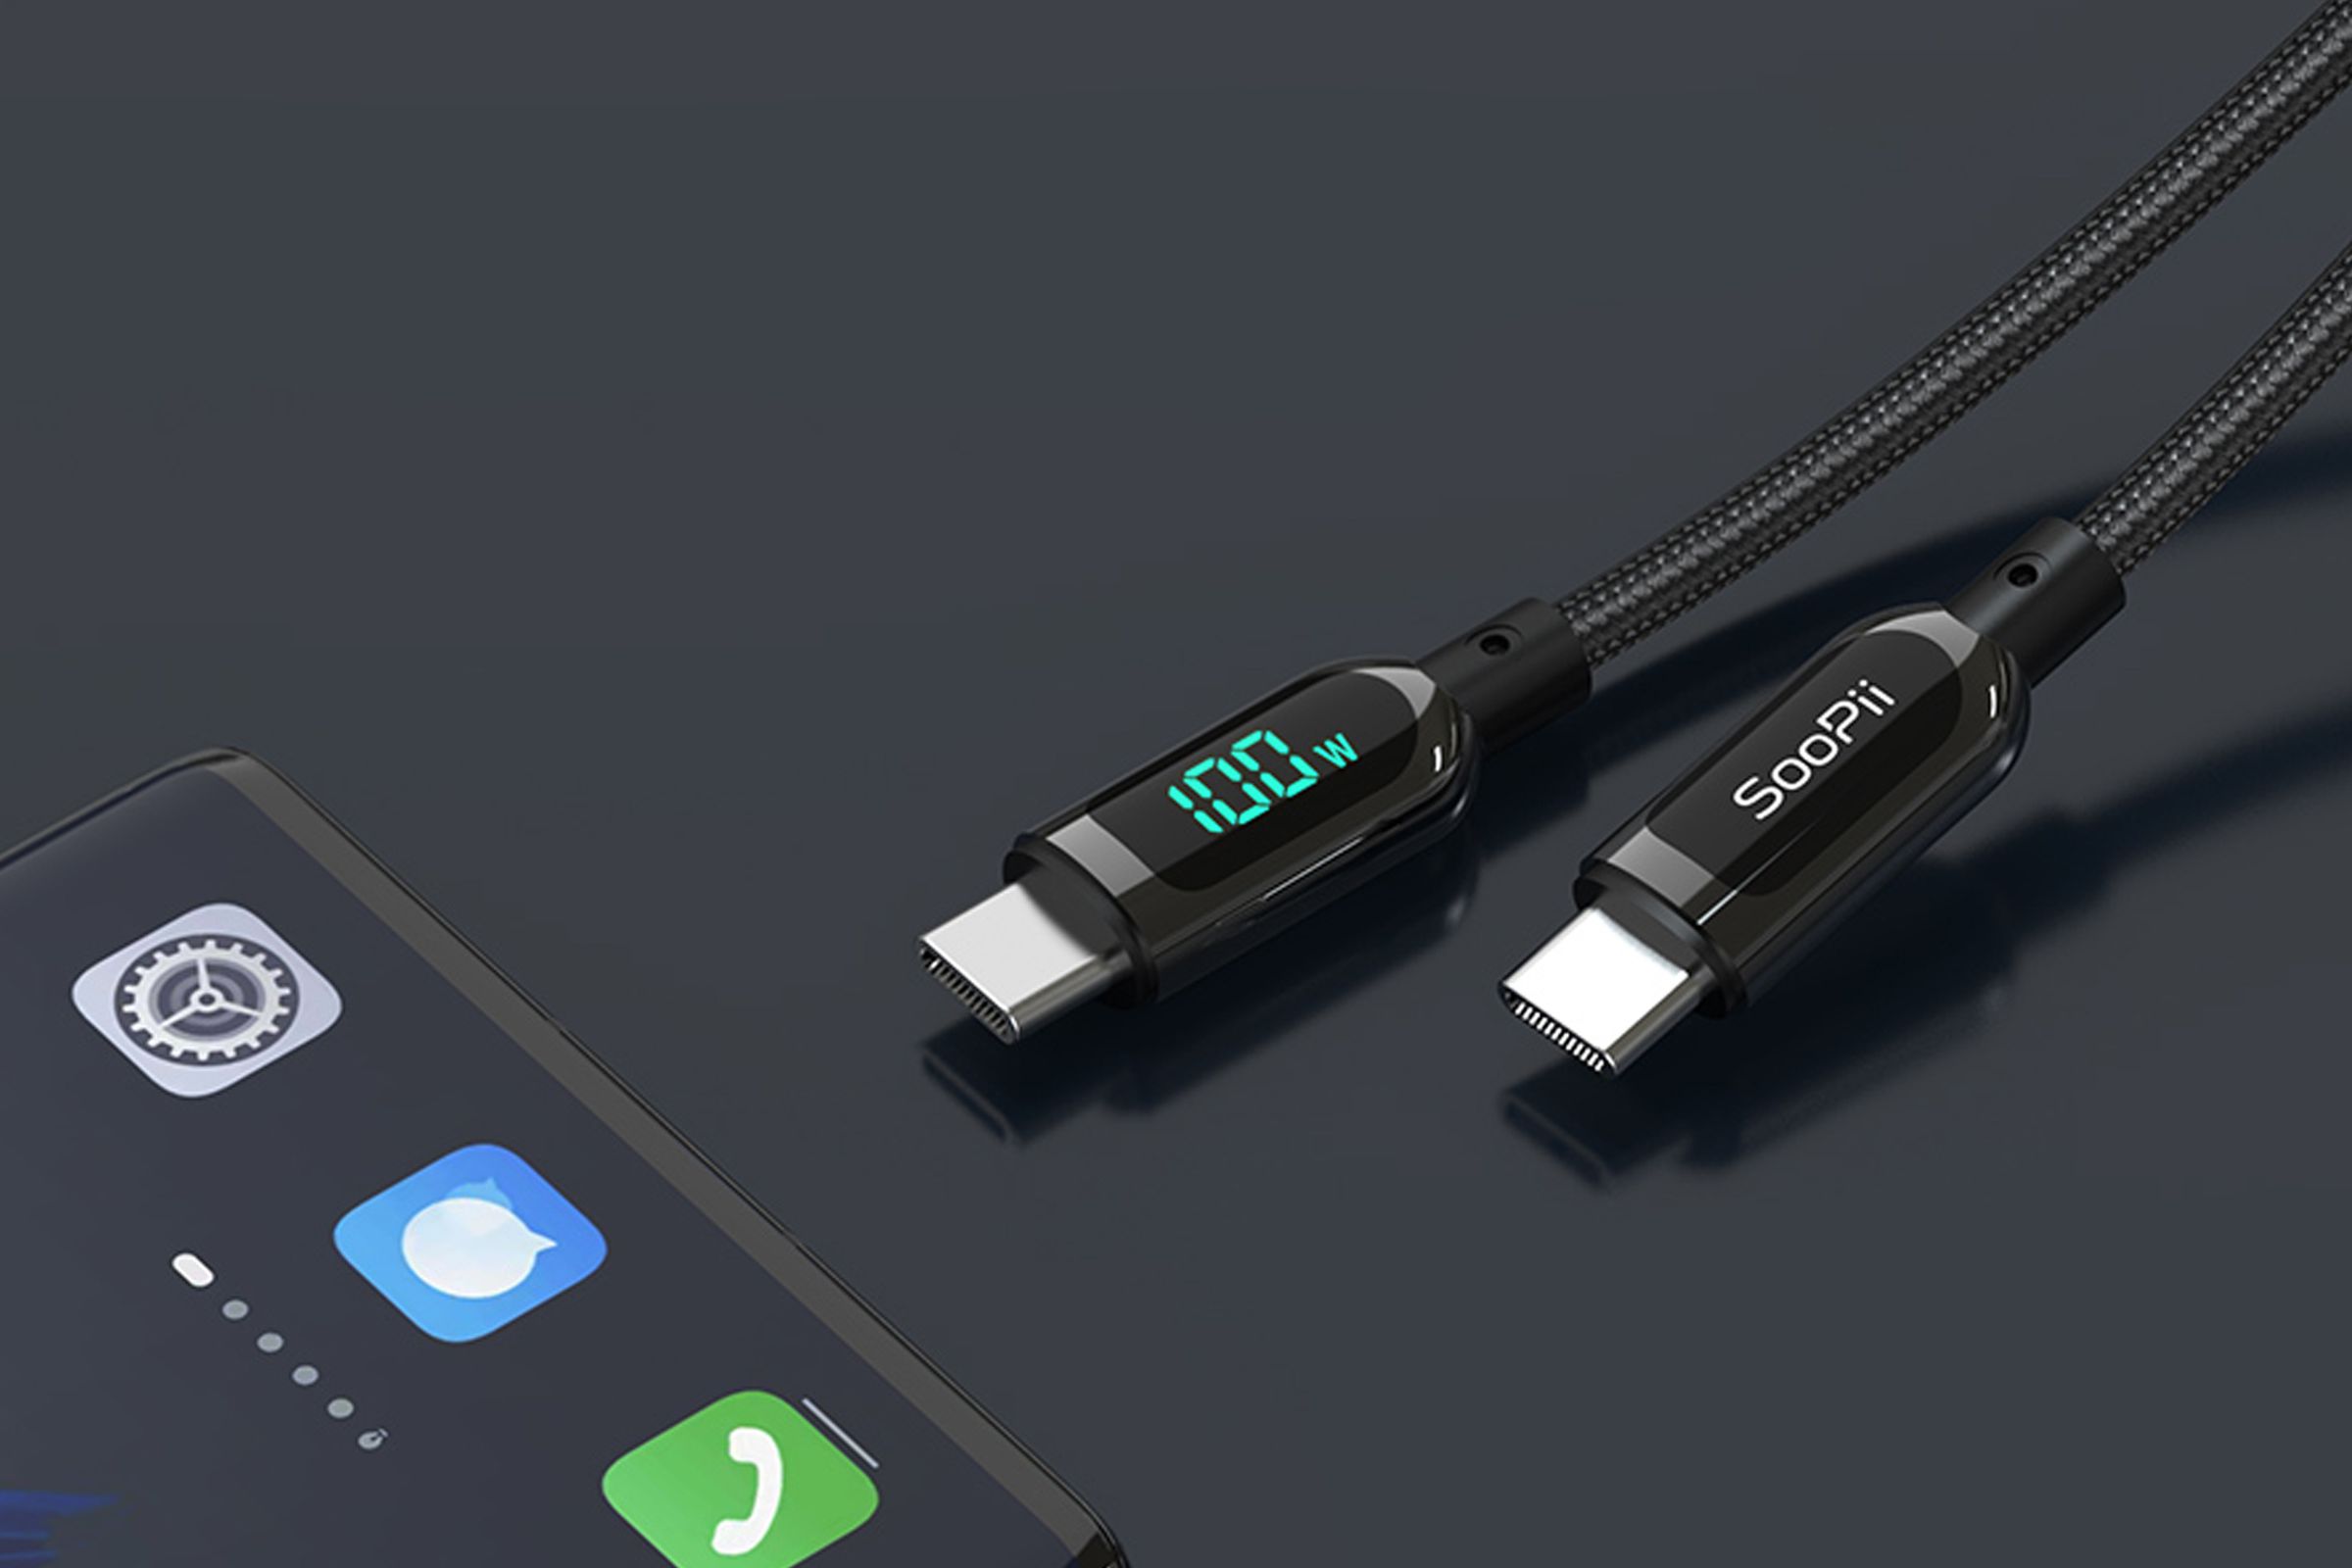 A USB-C to USB-C cable with a LED power meter built into one of its ends, about to be plugged into a phone.